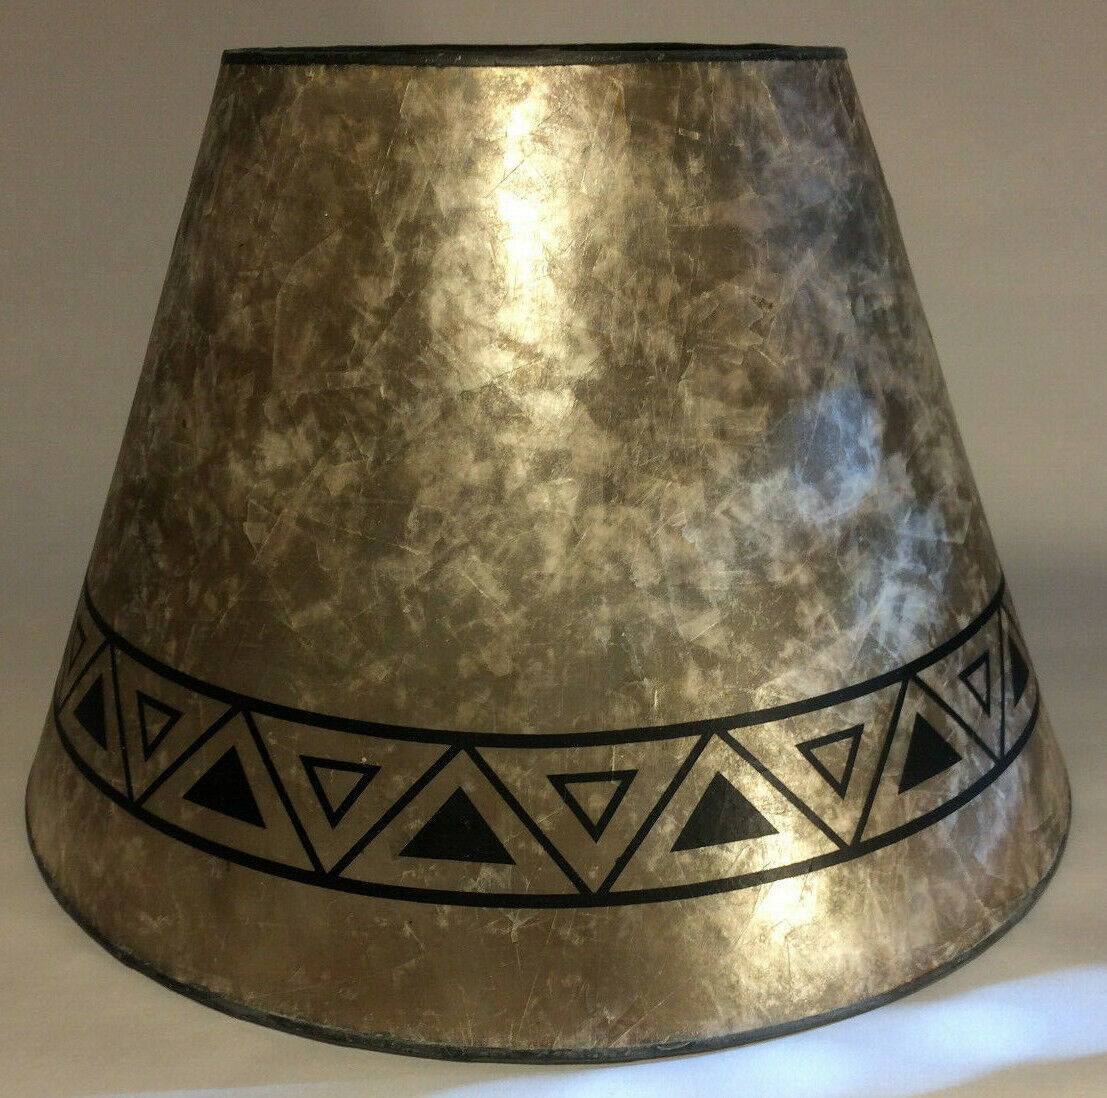 New Parchment Color Empire Shaped Mica Lamp Shade W/ Geometric Design Print 709N